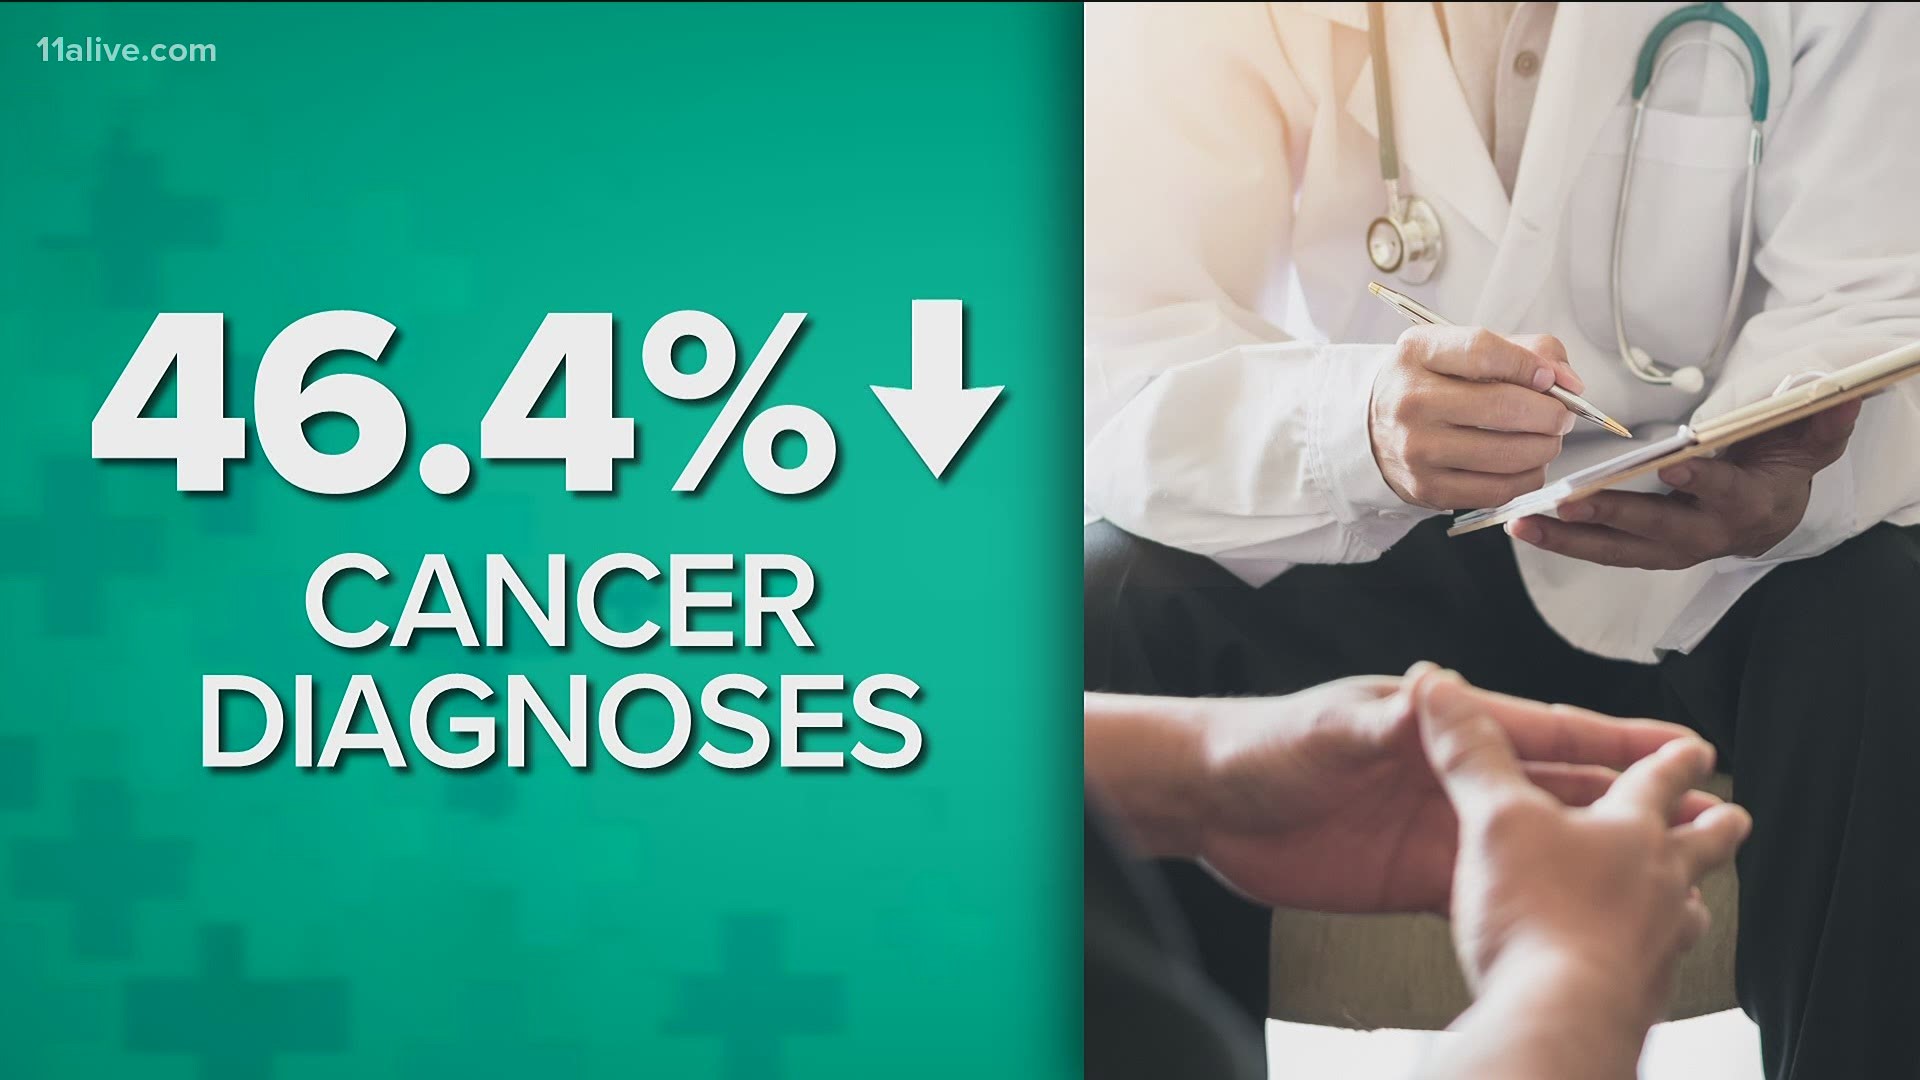 A new study found a sharp drop in newly identified cases of cancer because so many people are putting off important screenings.